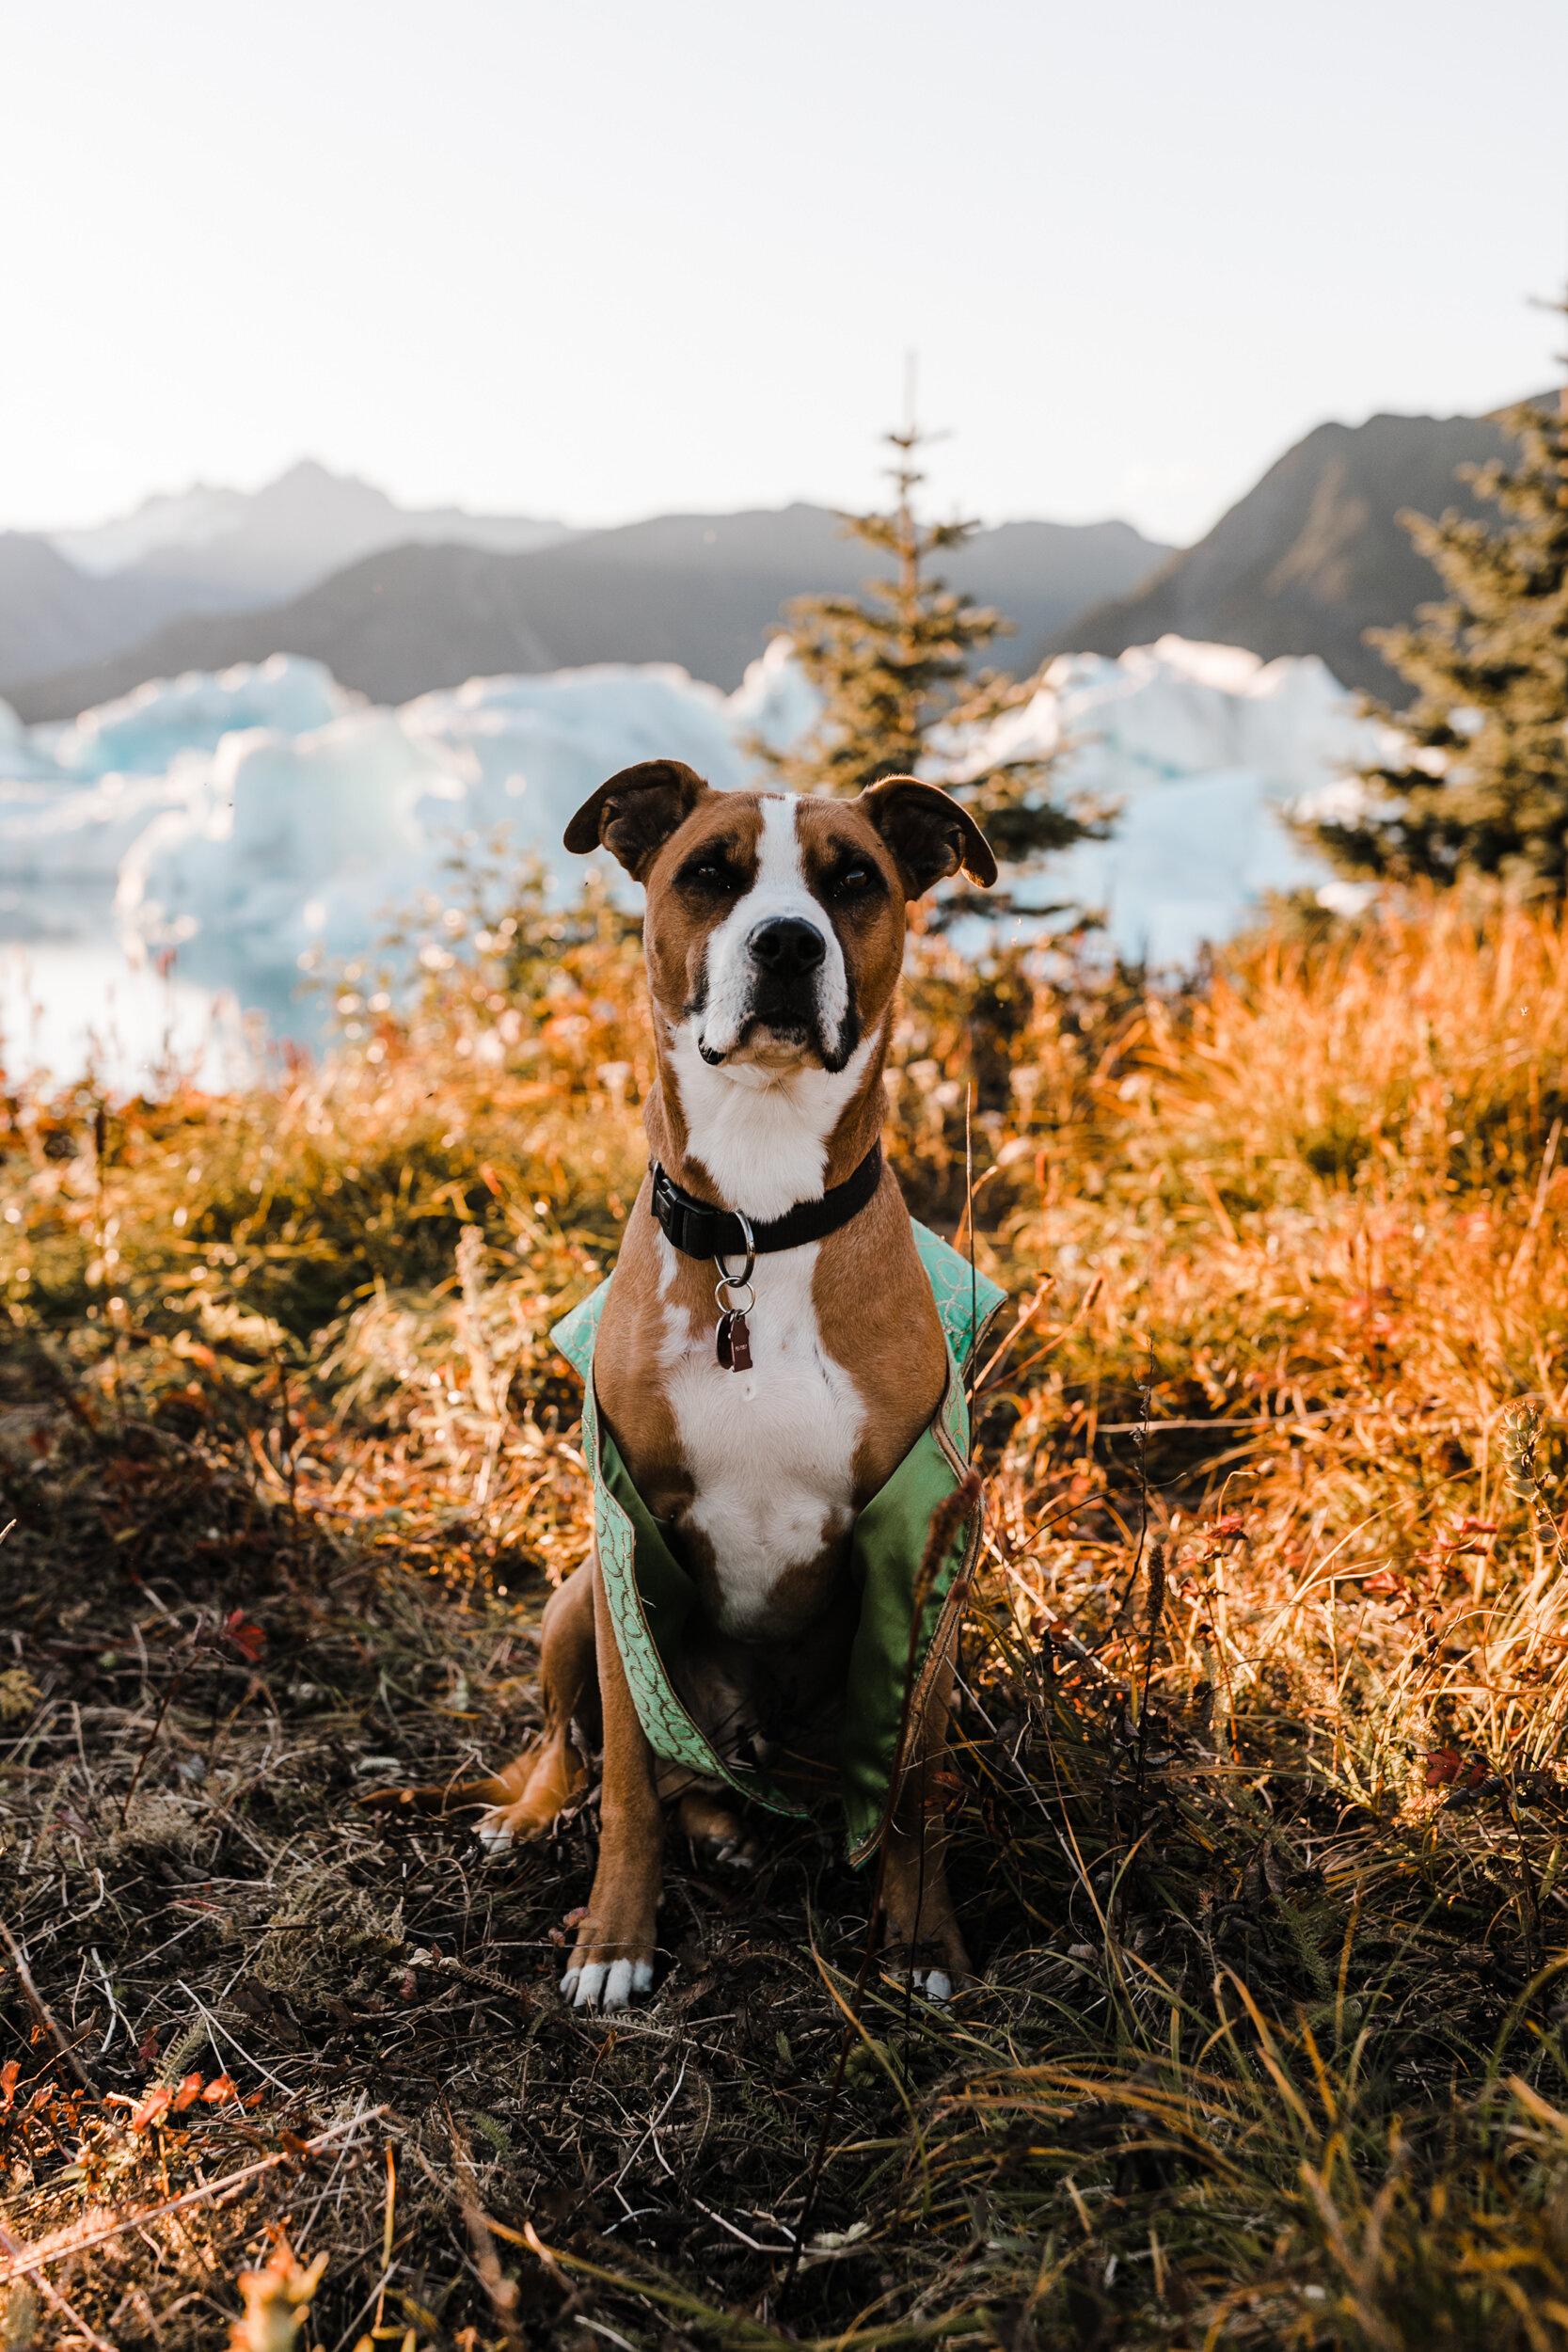 Helicopter Packrafting Elopement in Alaska | Indian Wedding Dress | Adventure Wedding with a dog | The Hearnes